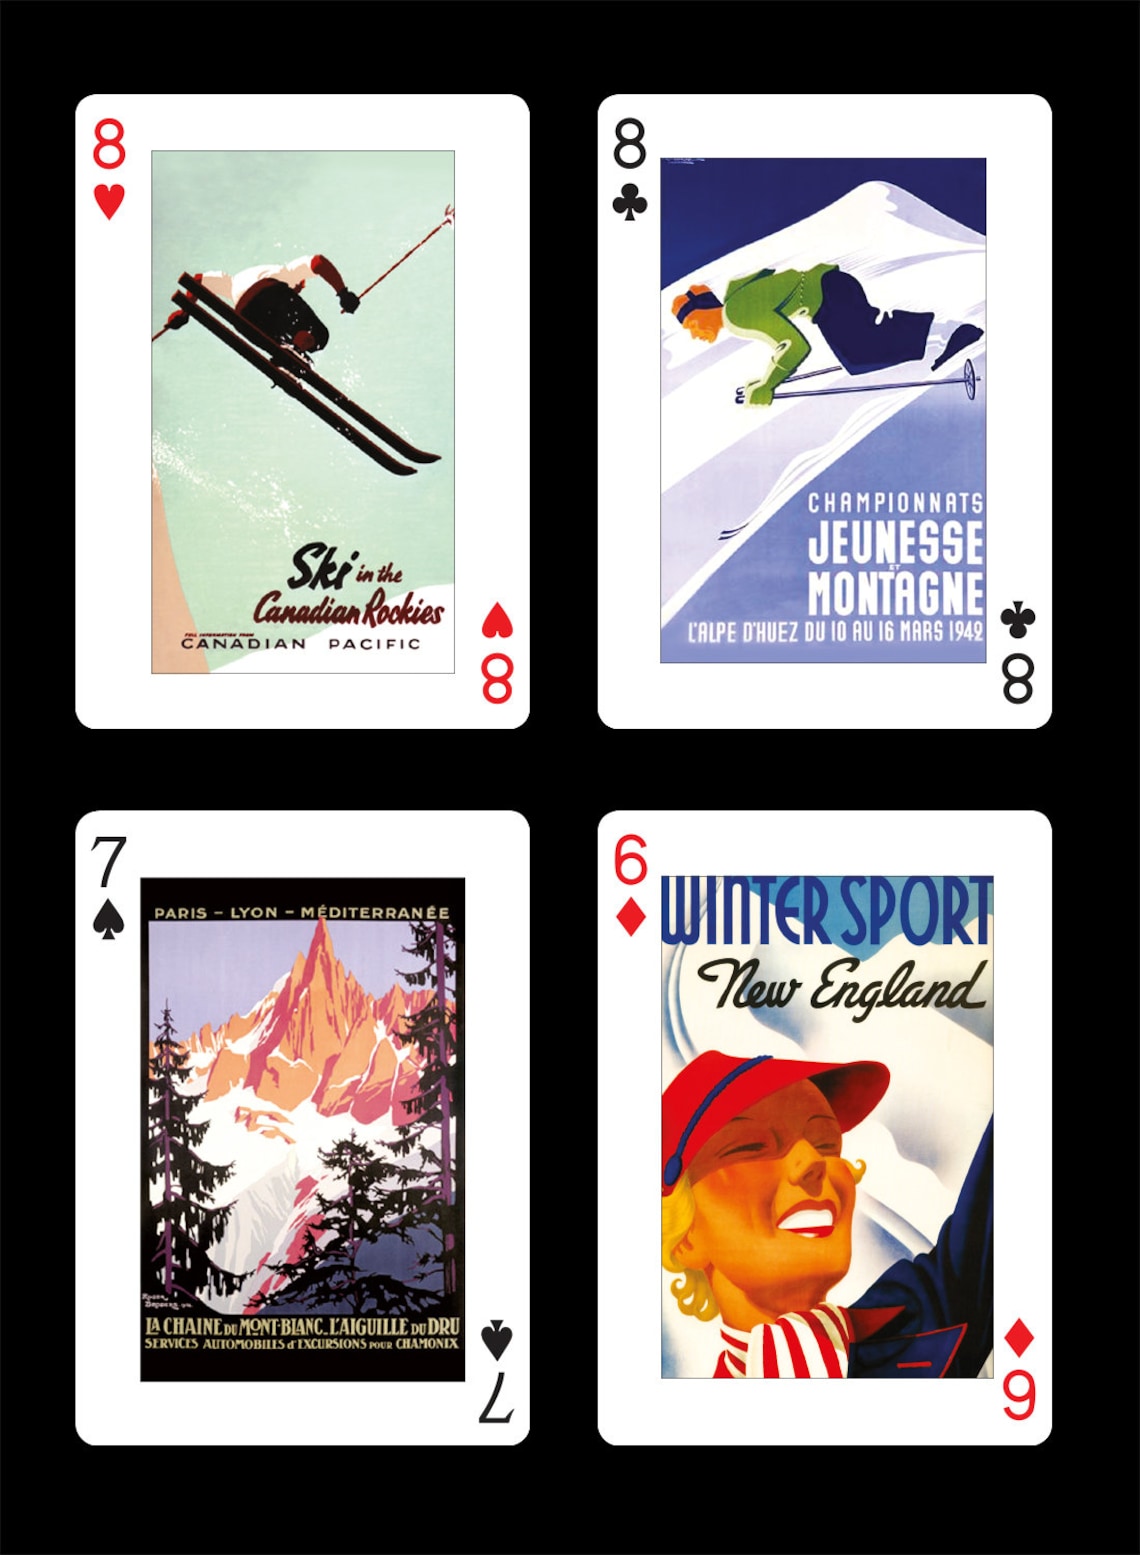 Image of 4 paying cards with art from famous vintage transport and sporting posters. Ski in the Canadian Pacific, Championnats Jeunesse Montagne, Paris Lyon Mediterranee & Winter Sport New England.